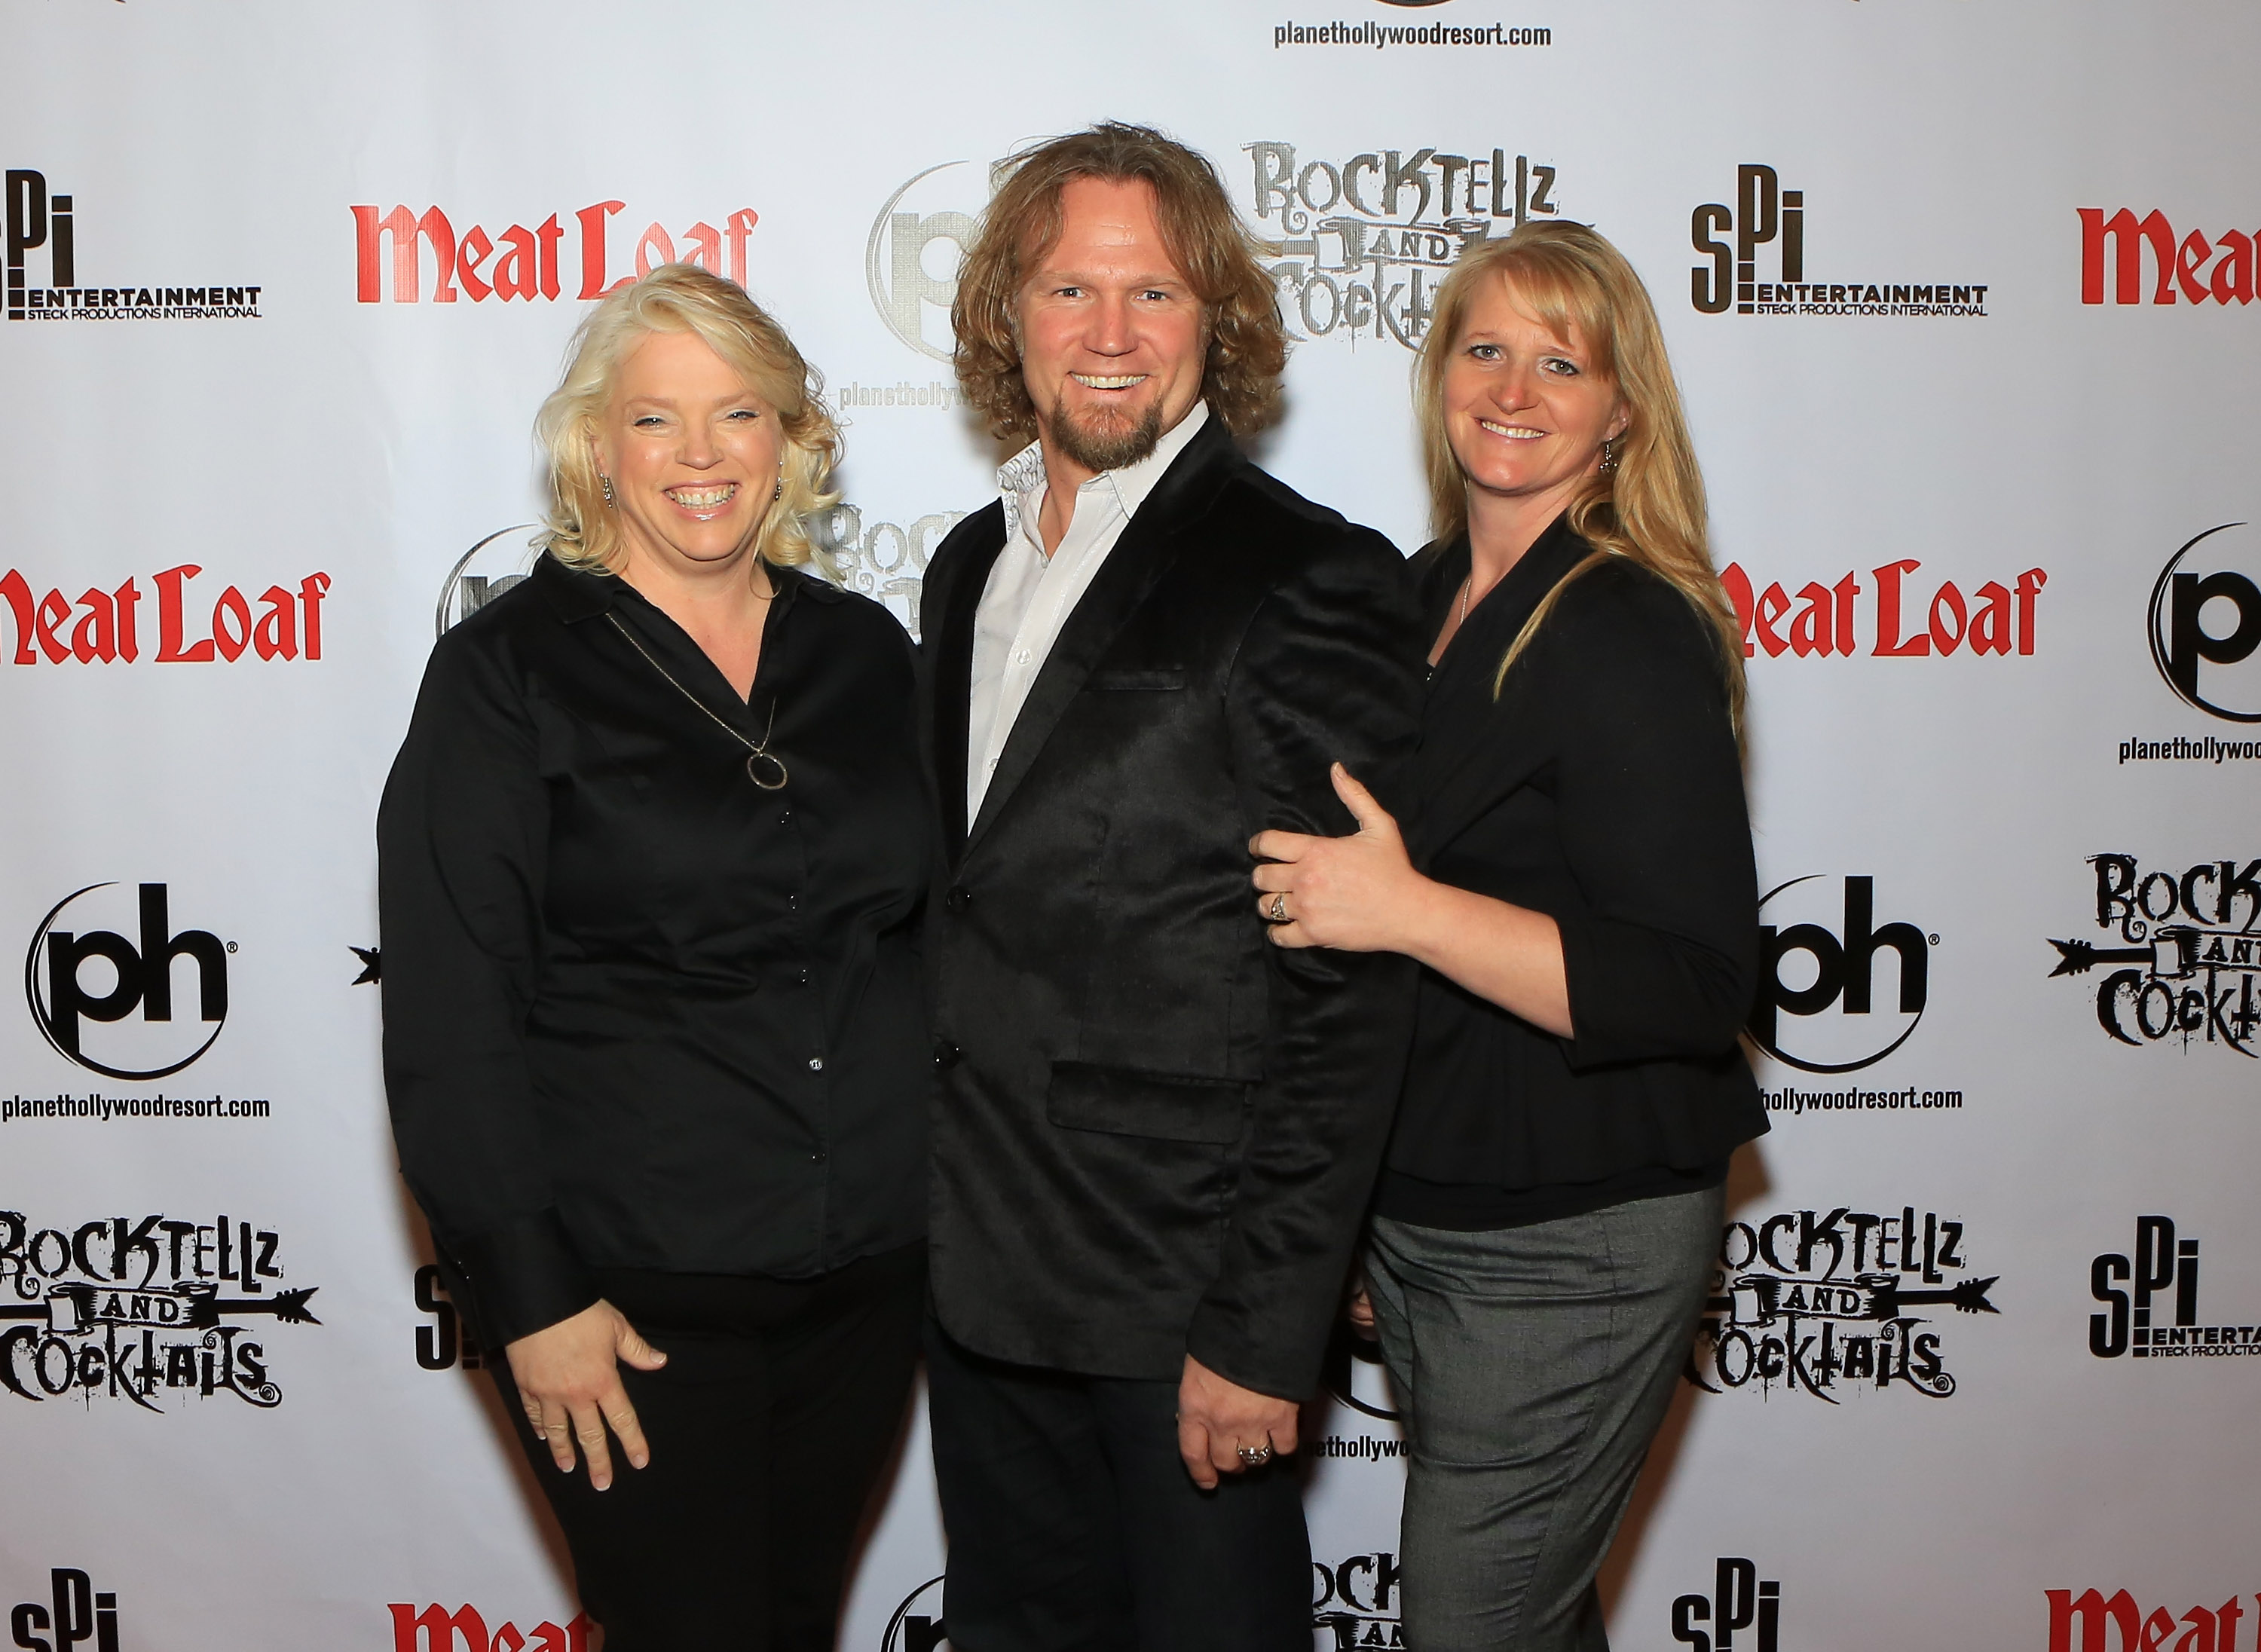 Janell Brown, Kody Brown and Christine Brown post for a photo at Planet Hollywood Resort & Casino during the 'Rocktellz & Cocktails Presents Meat Loaf'